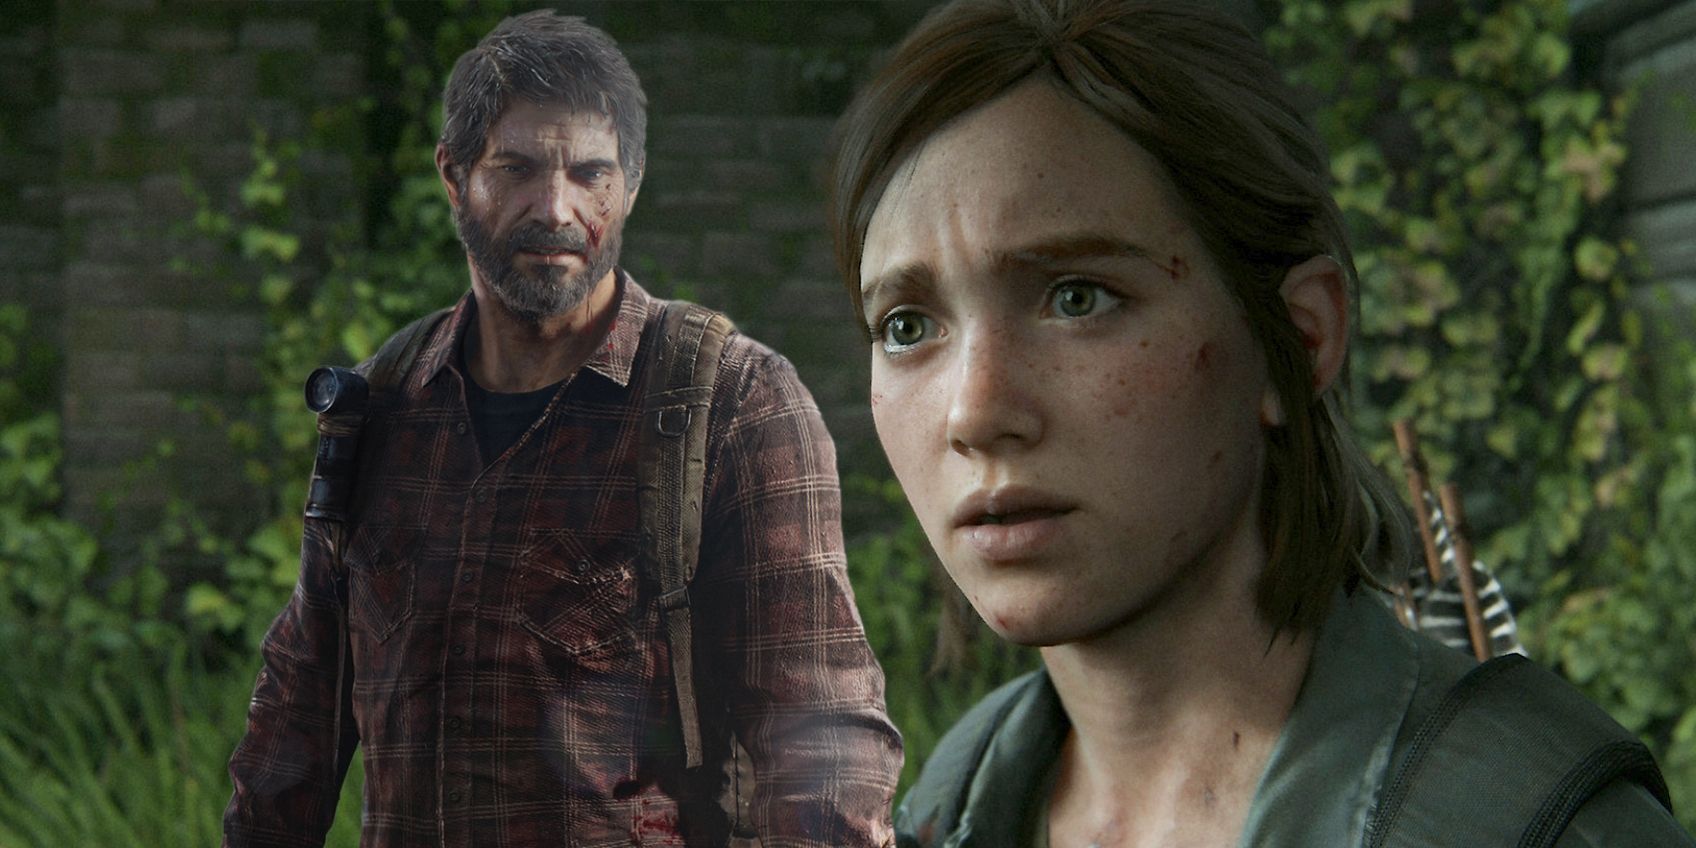 Who Dies in The Last of Us Part 2 Explained and Detailed